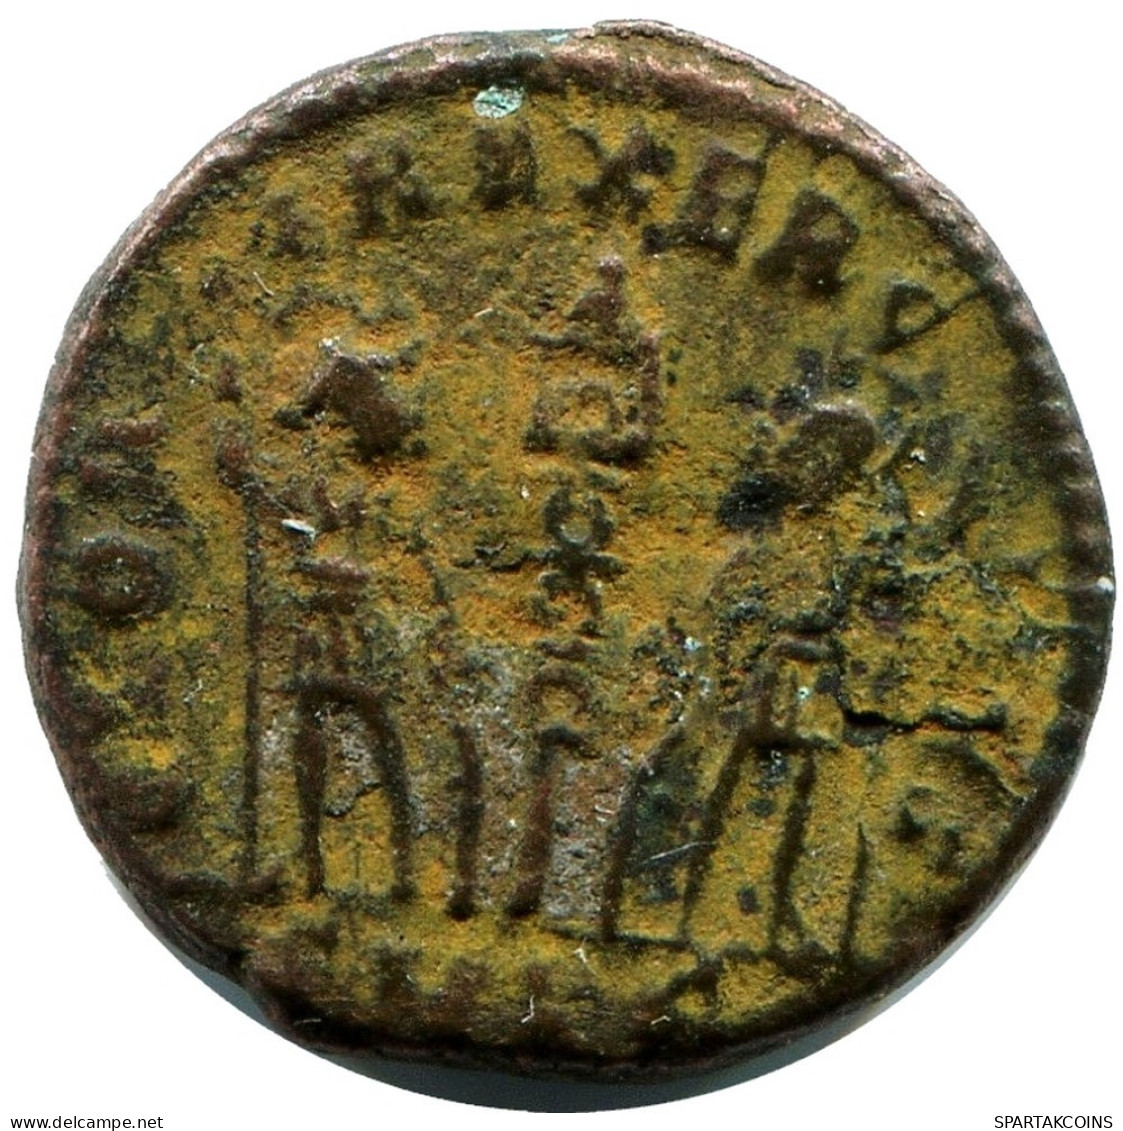 CONSTANTINE I MINTED IN CYZICUS FROM THE ROYAL ONTARIO MUSEUM #ANC10988.14.E.A - The Christian Empire (307 AD To 363 AD)